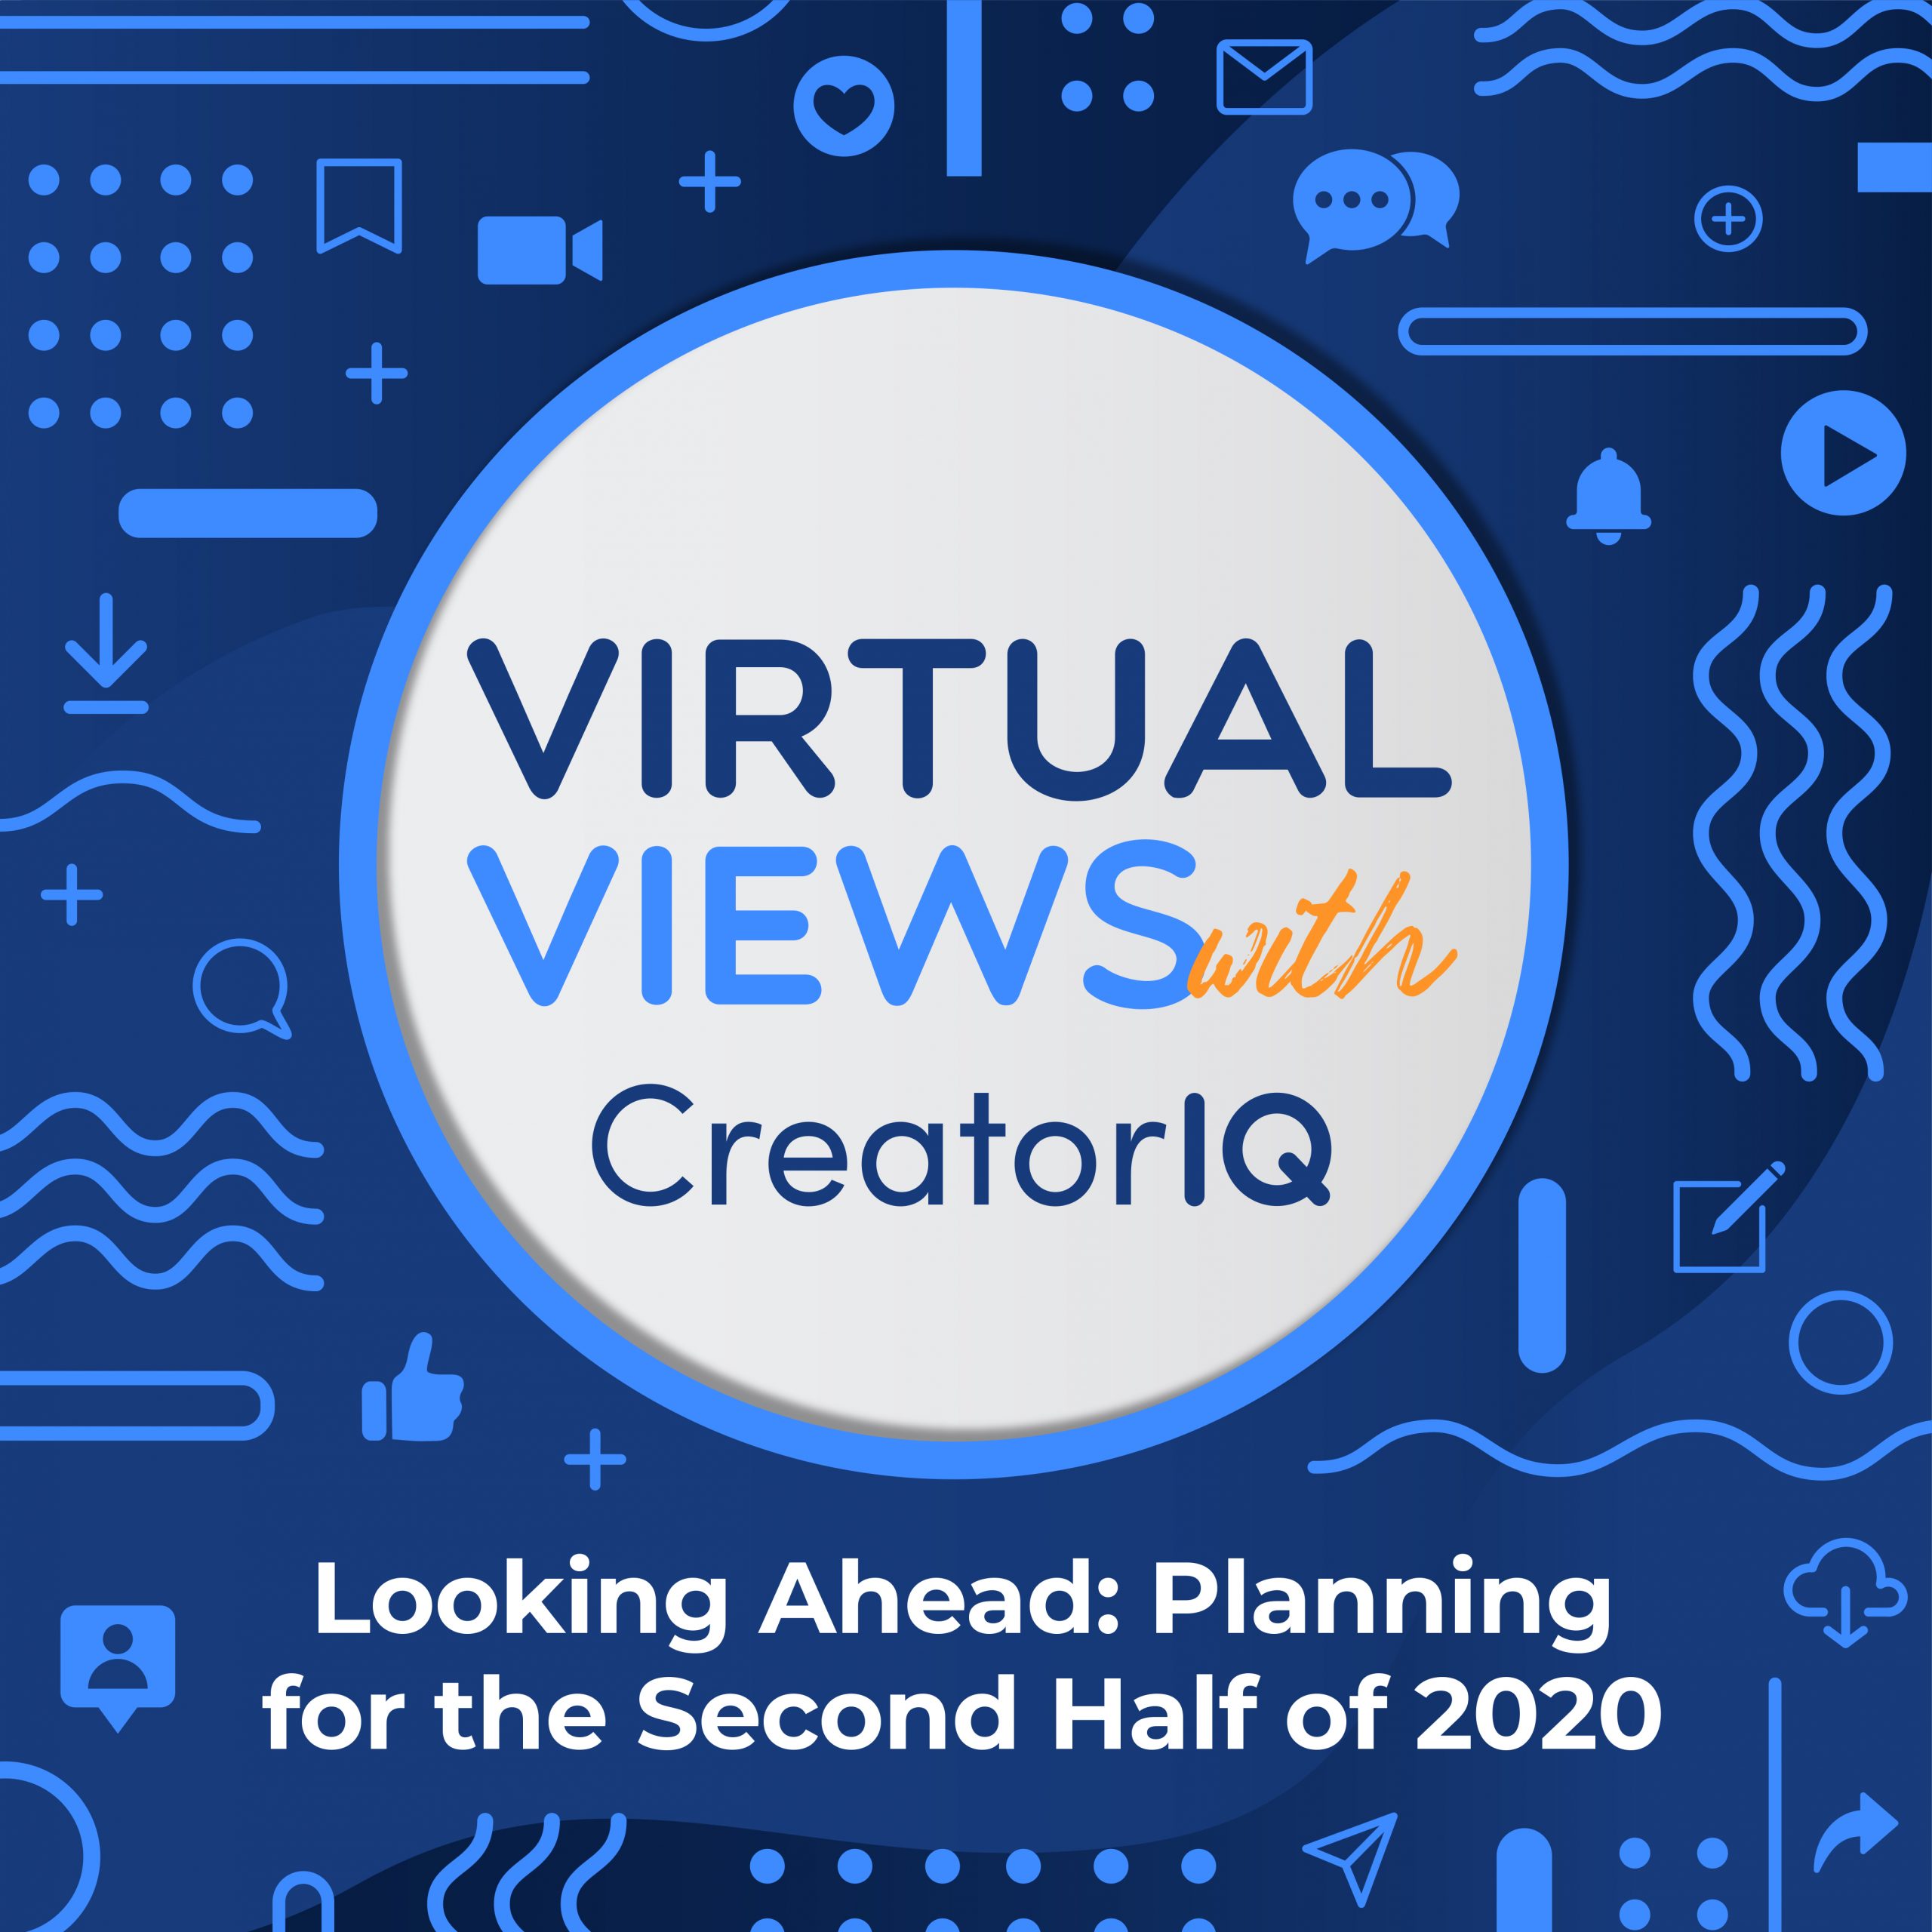 Virtual Views with CreatorIQ: Looking Ahead - Planning for the Second Half of 2020